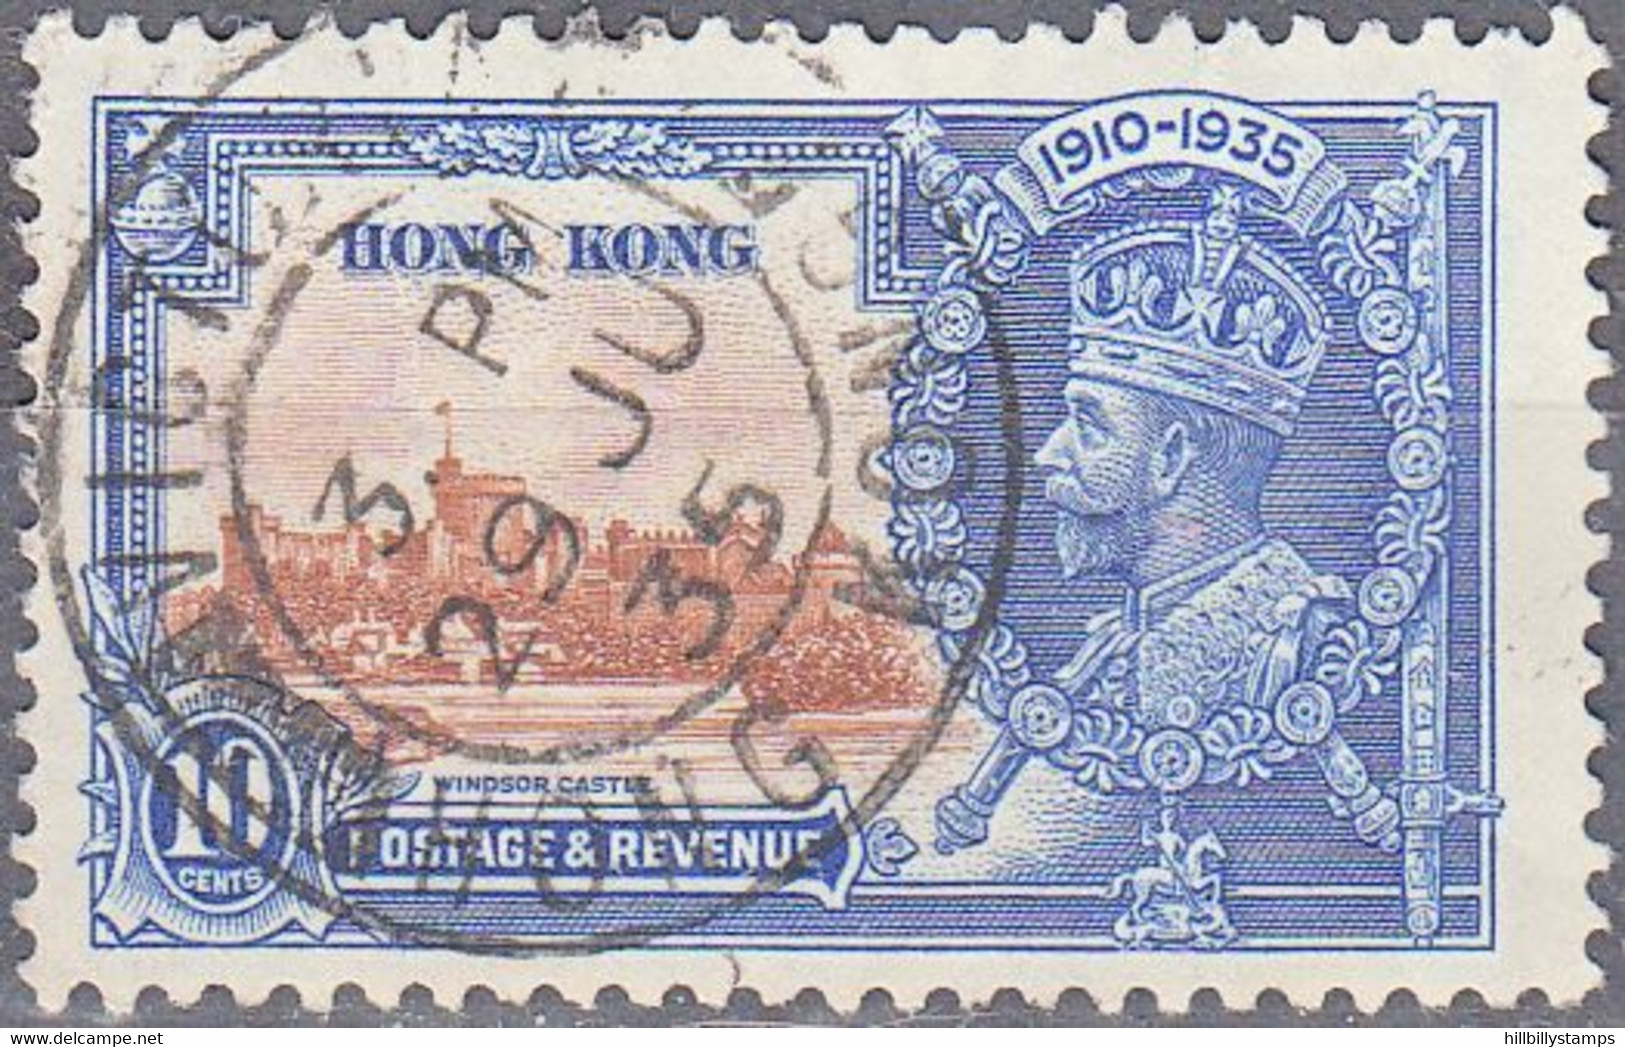 HONG KONG  SCOTT NO 149  USED YEAR 1935 - Used Stamps